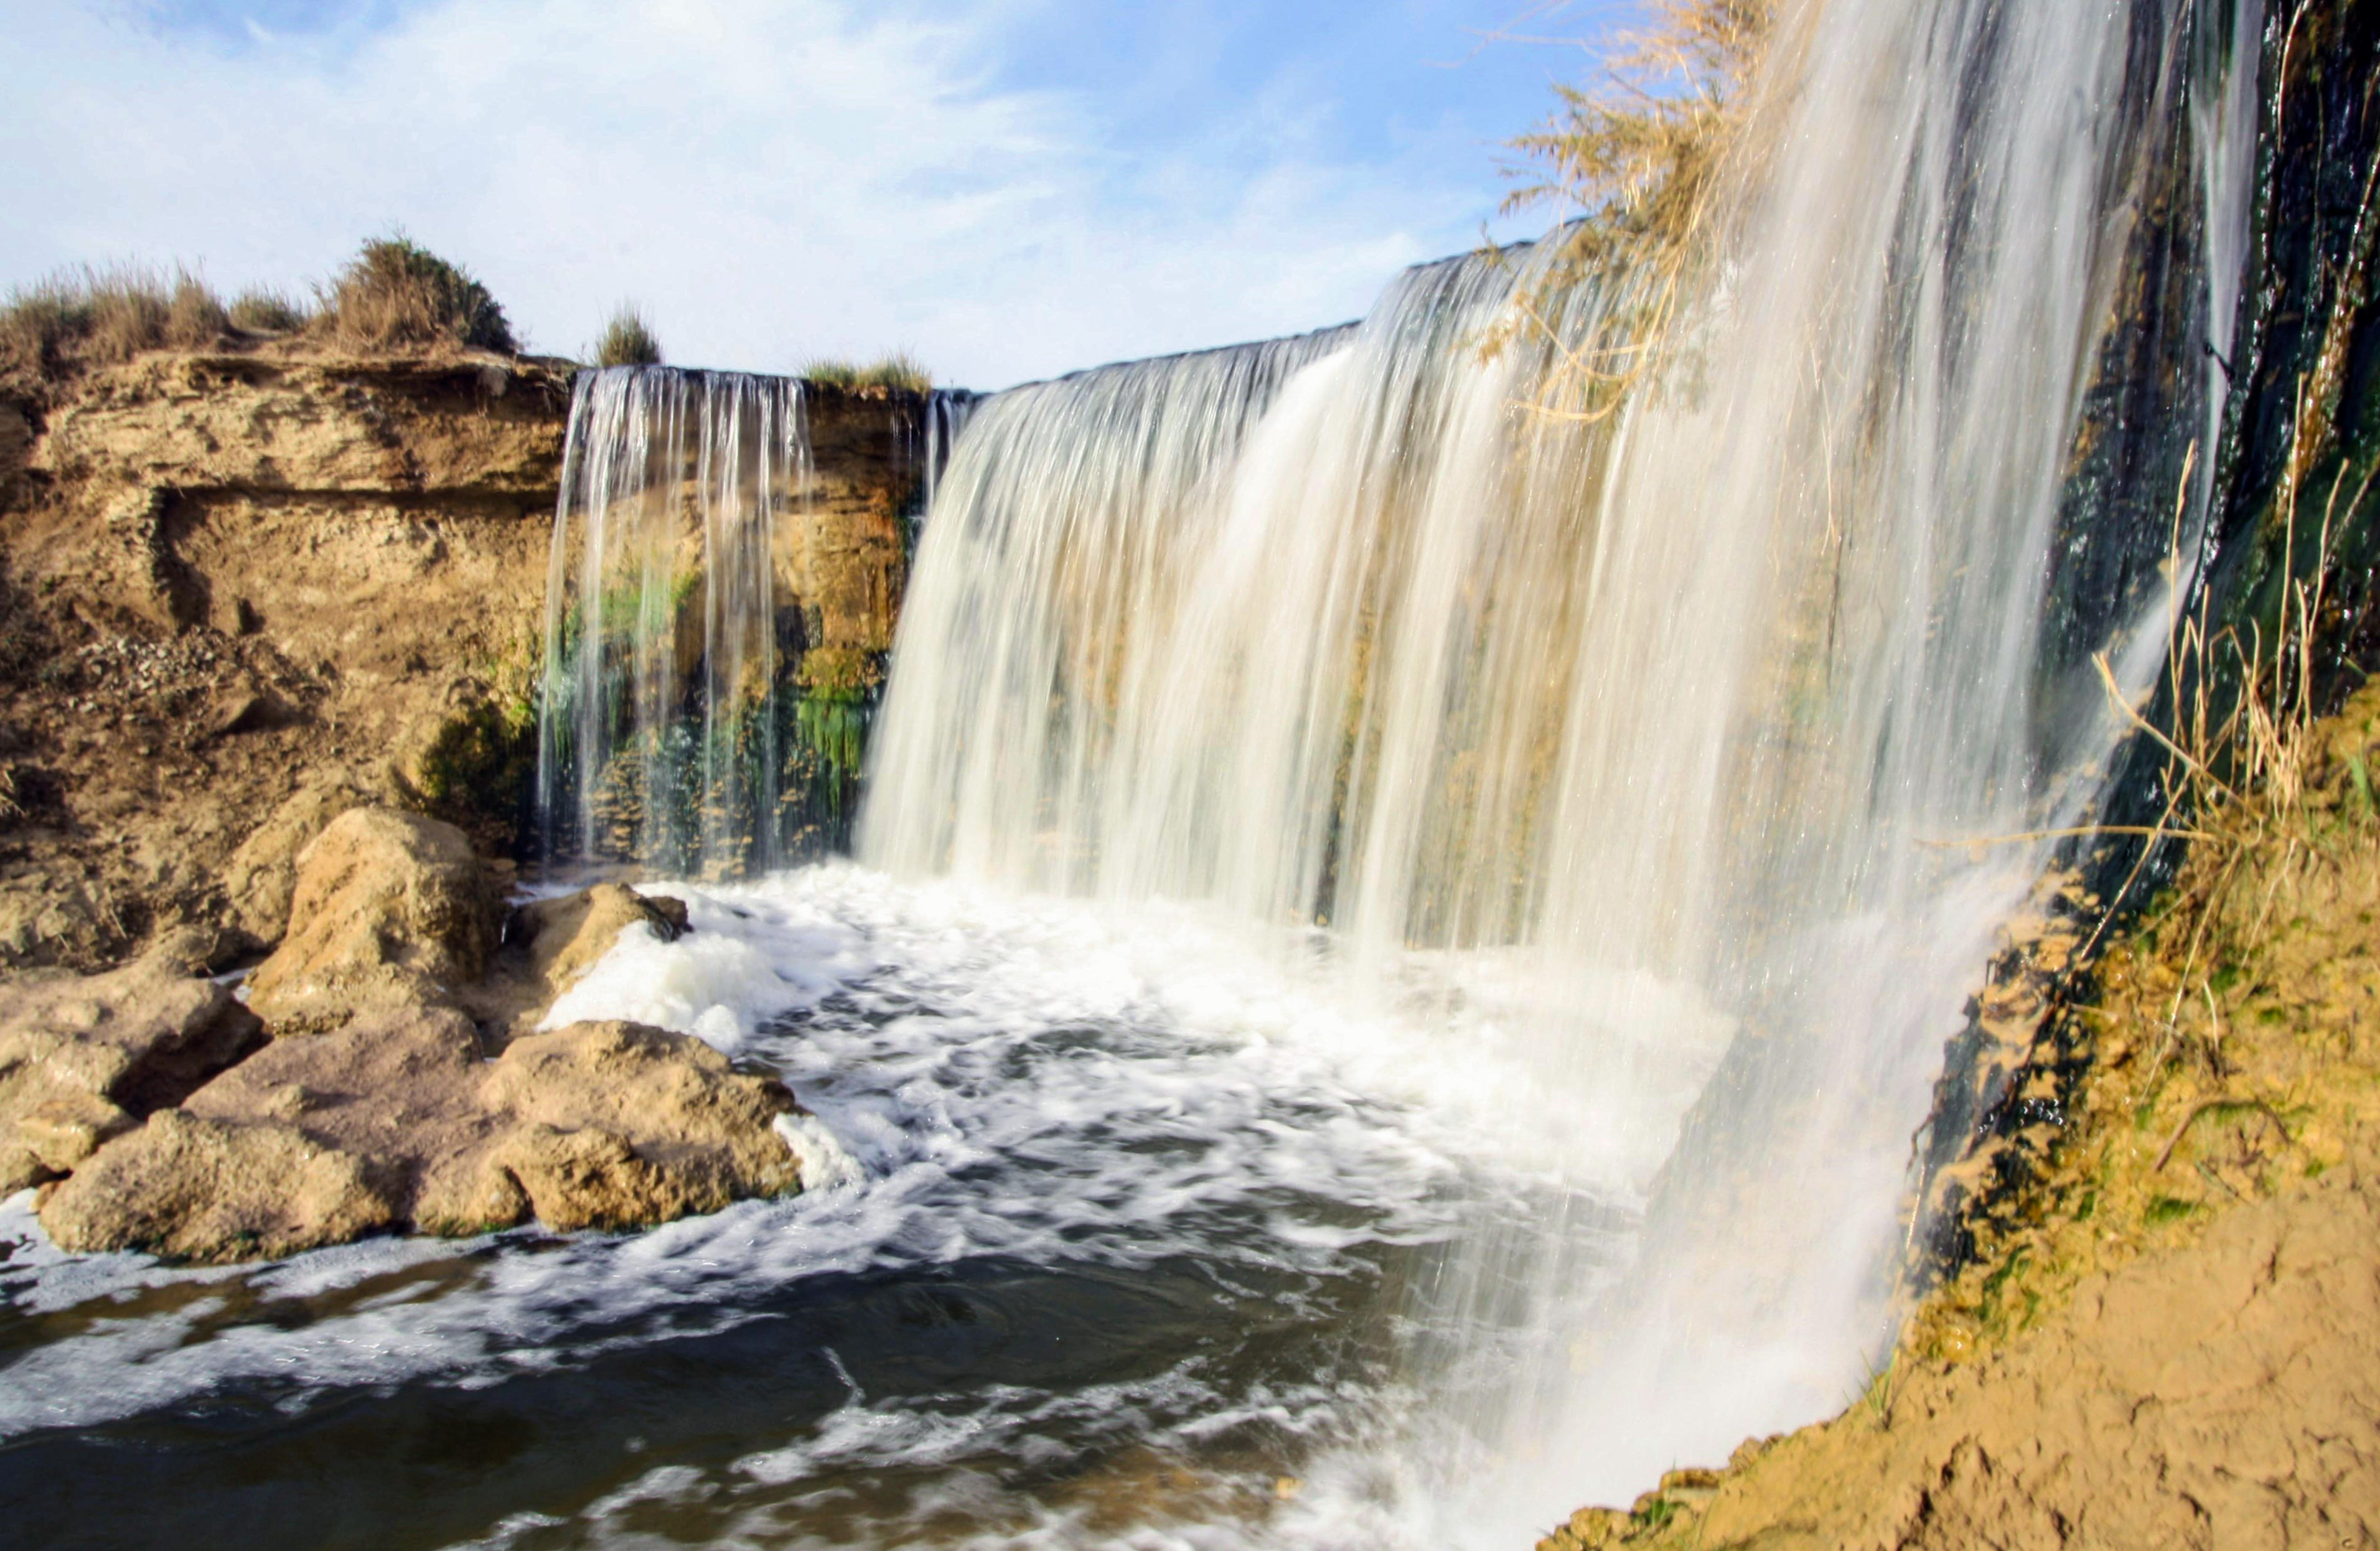 One side of Fayoum's famous waterfalls situated in Wady al-Rayan protectorate. Credit: Enas El Masry